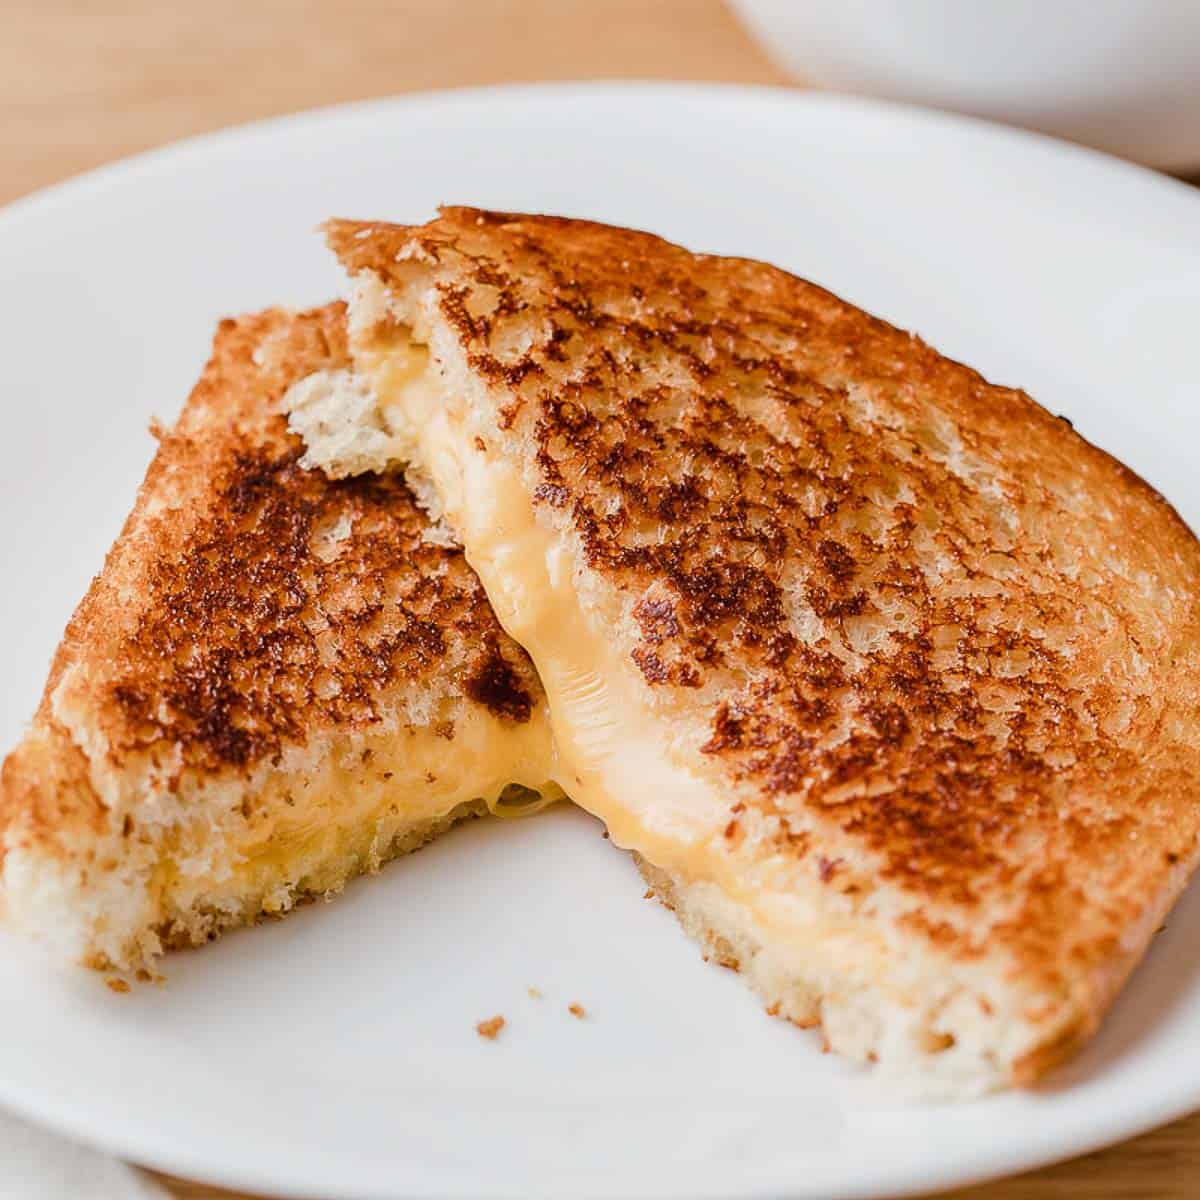 How to Make a Grilled Cheese Sandwich